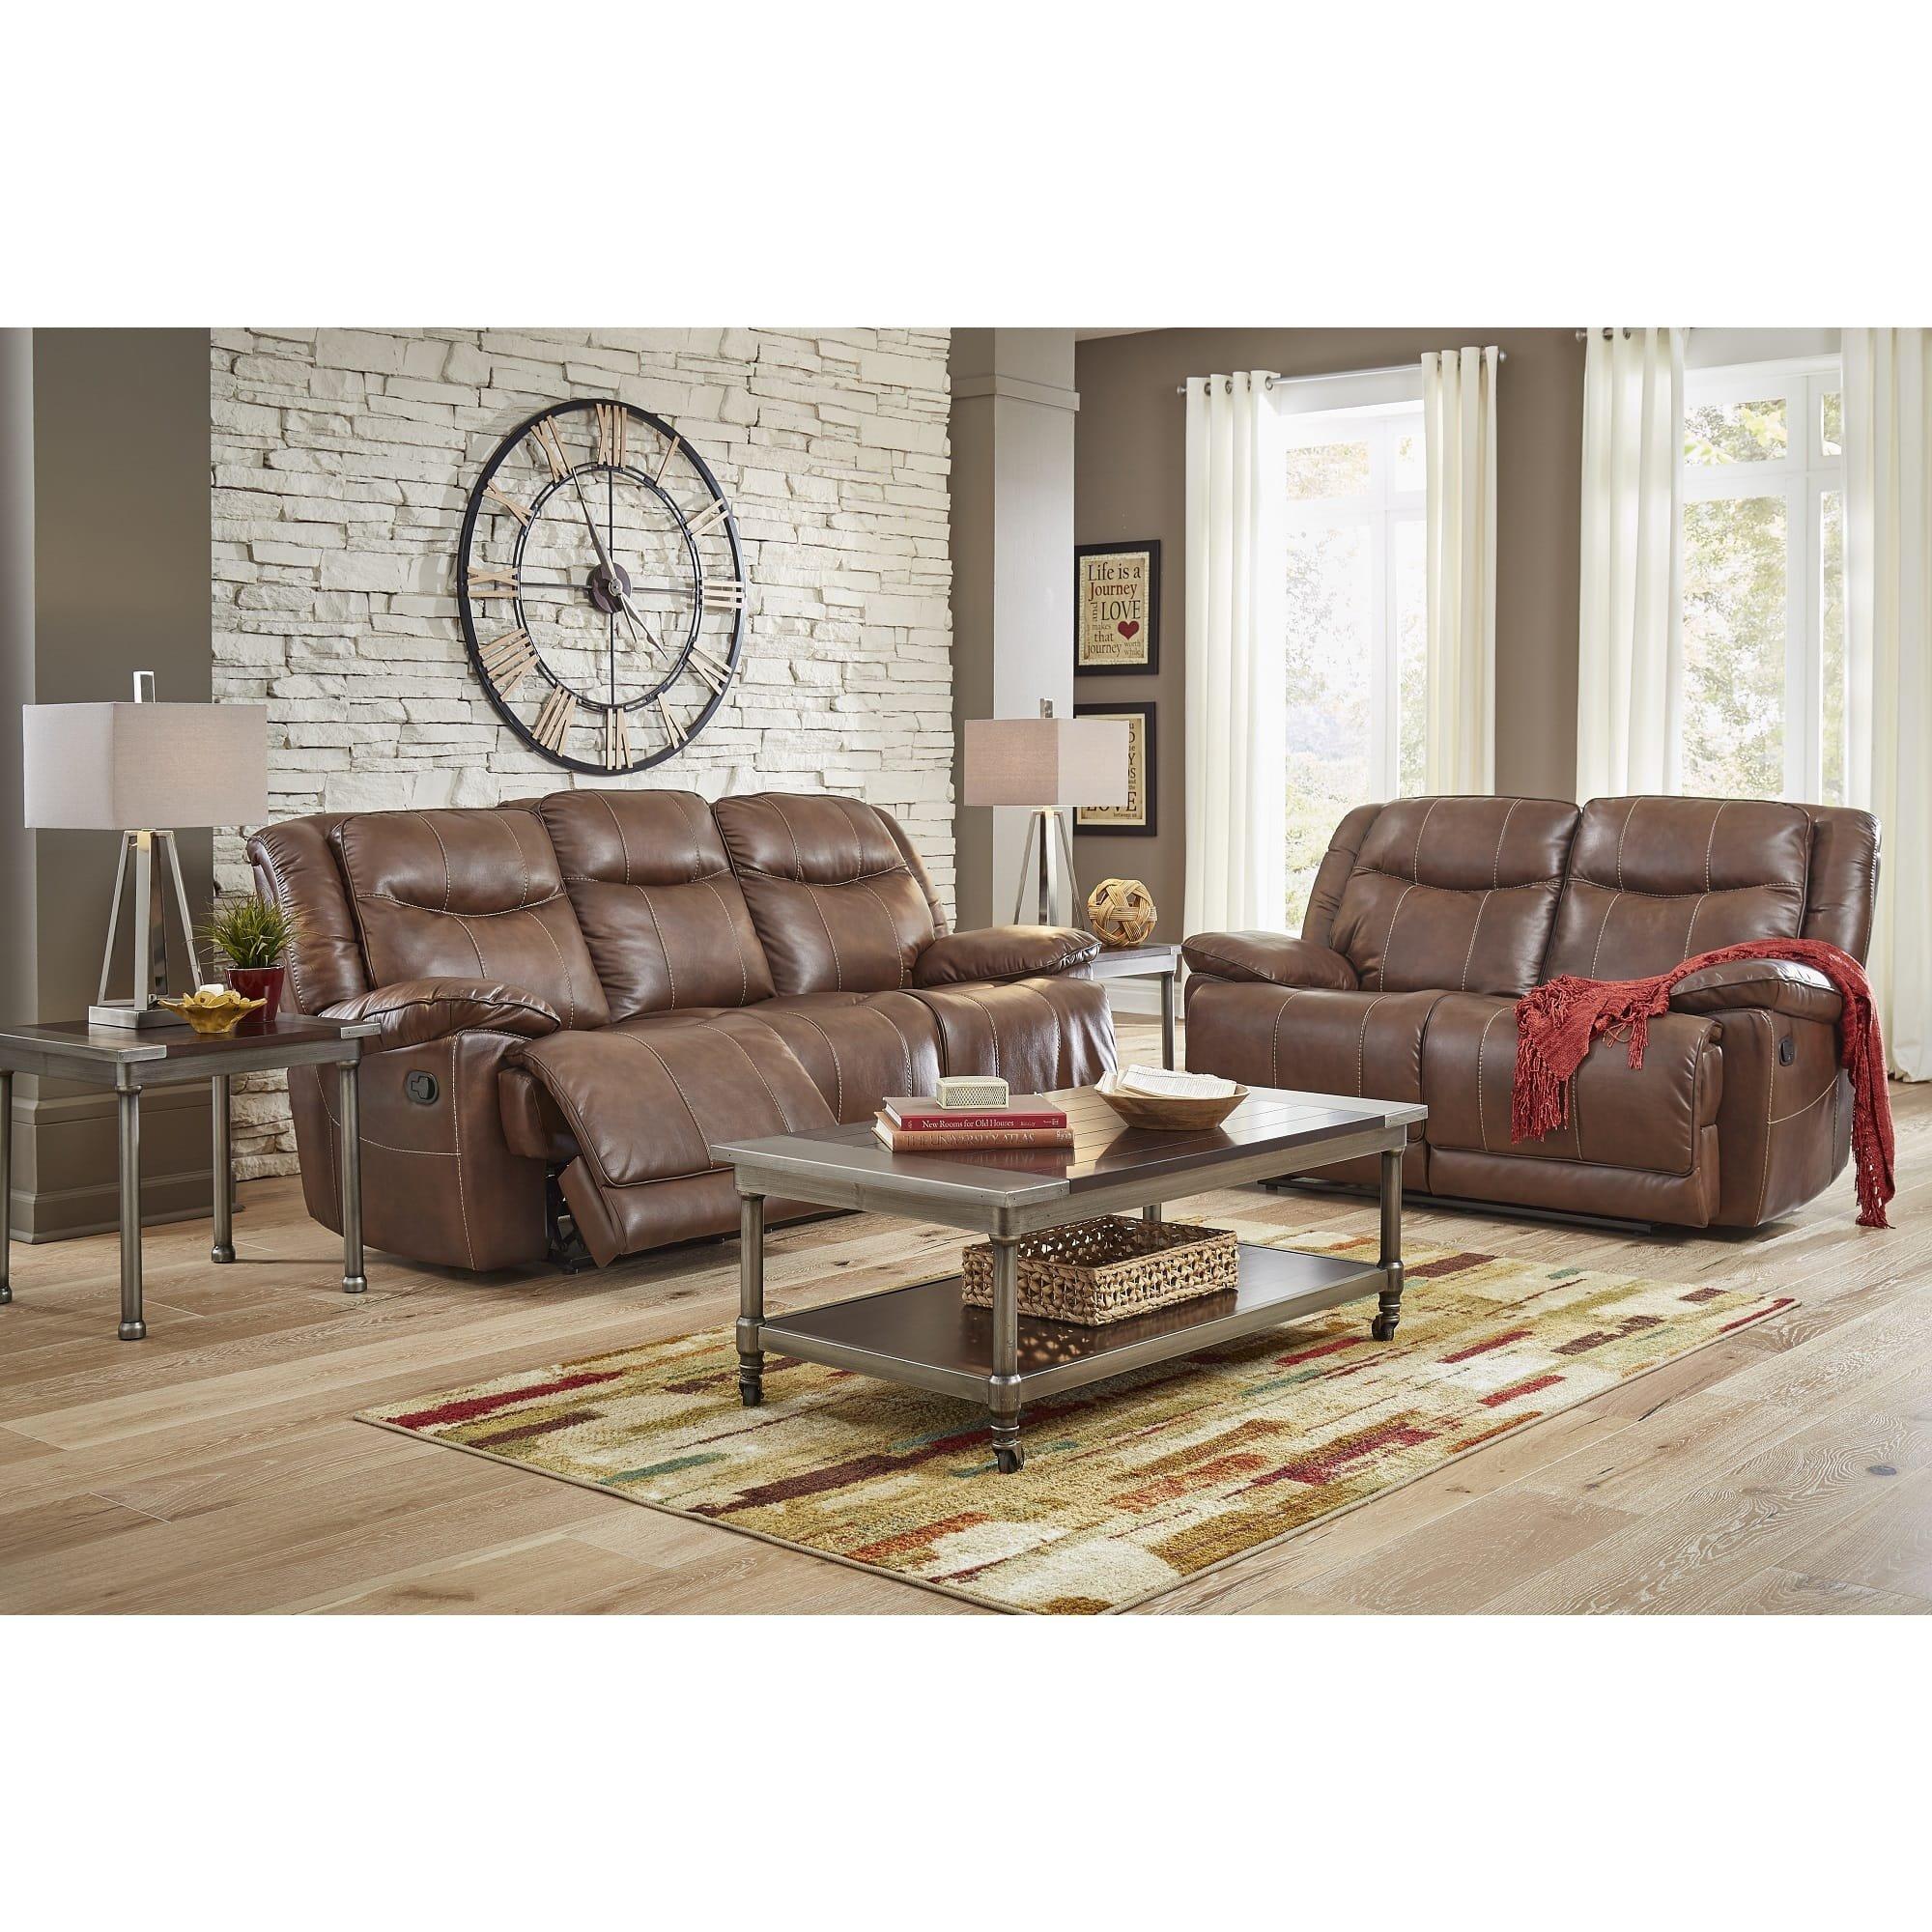 Rent To Own Amalfi 2 Piece Barron Reclining Living Room Collection At Aarons Today